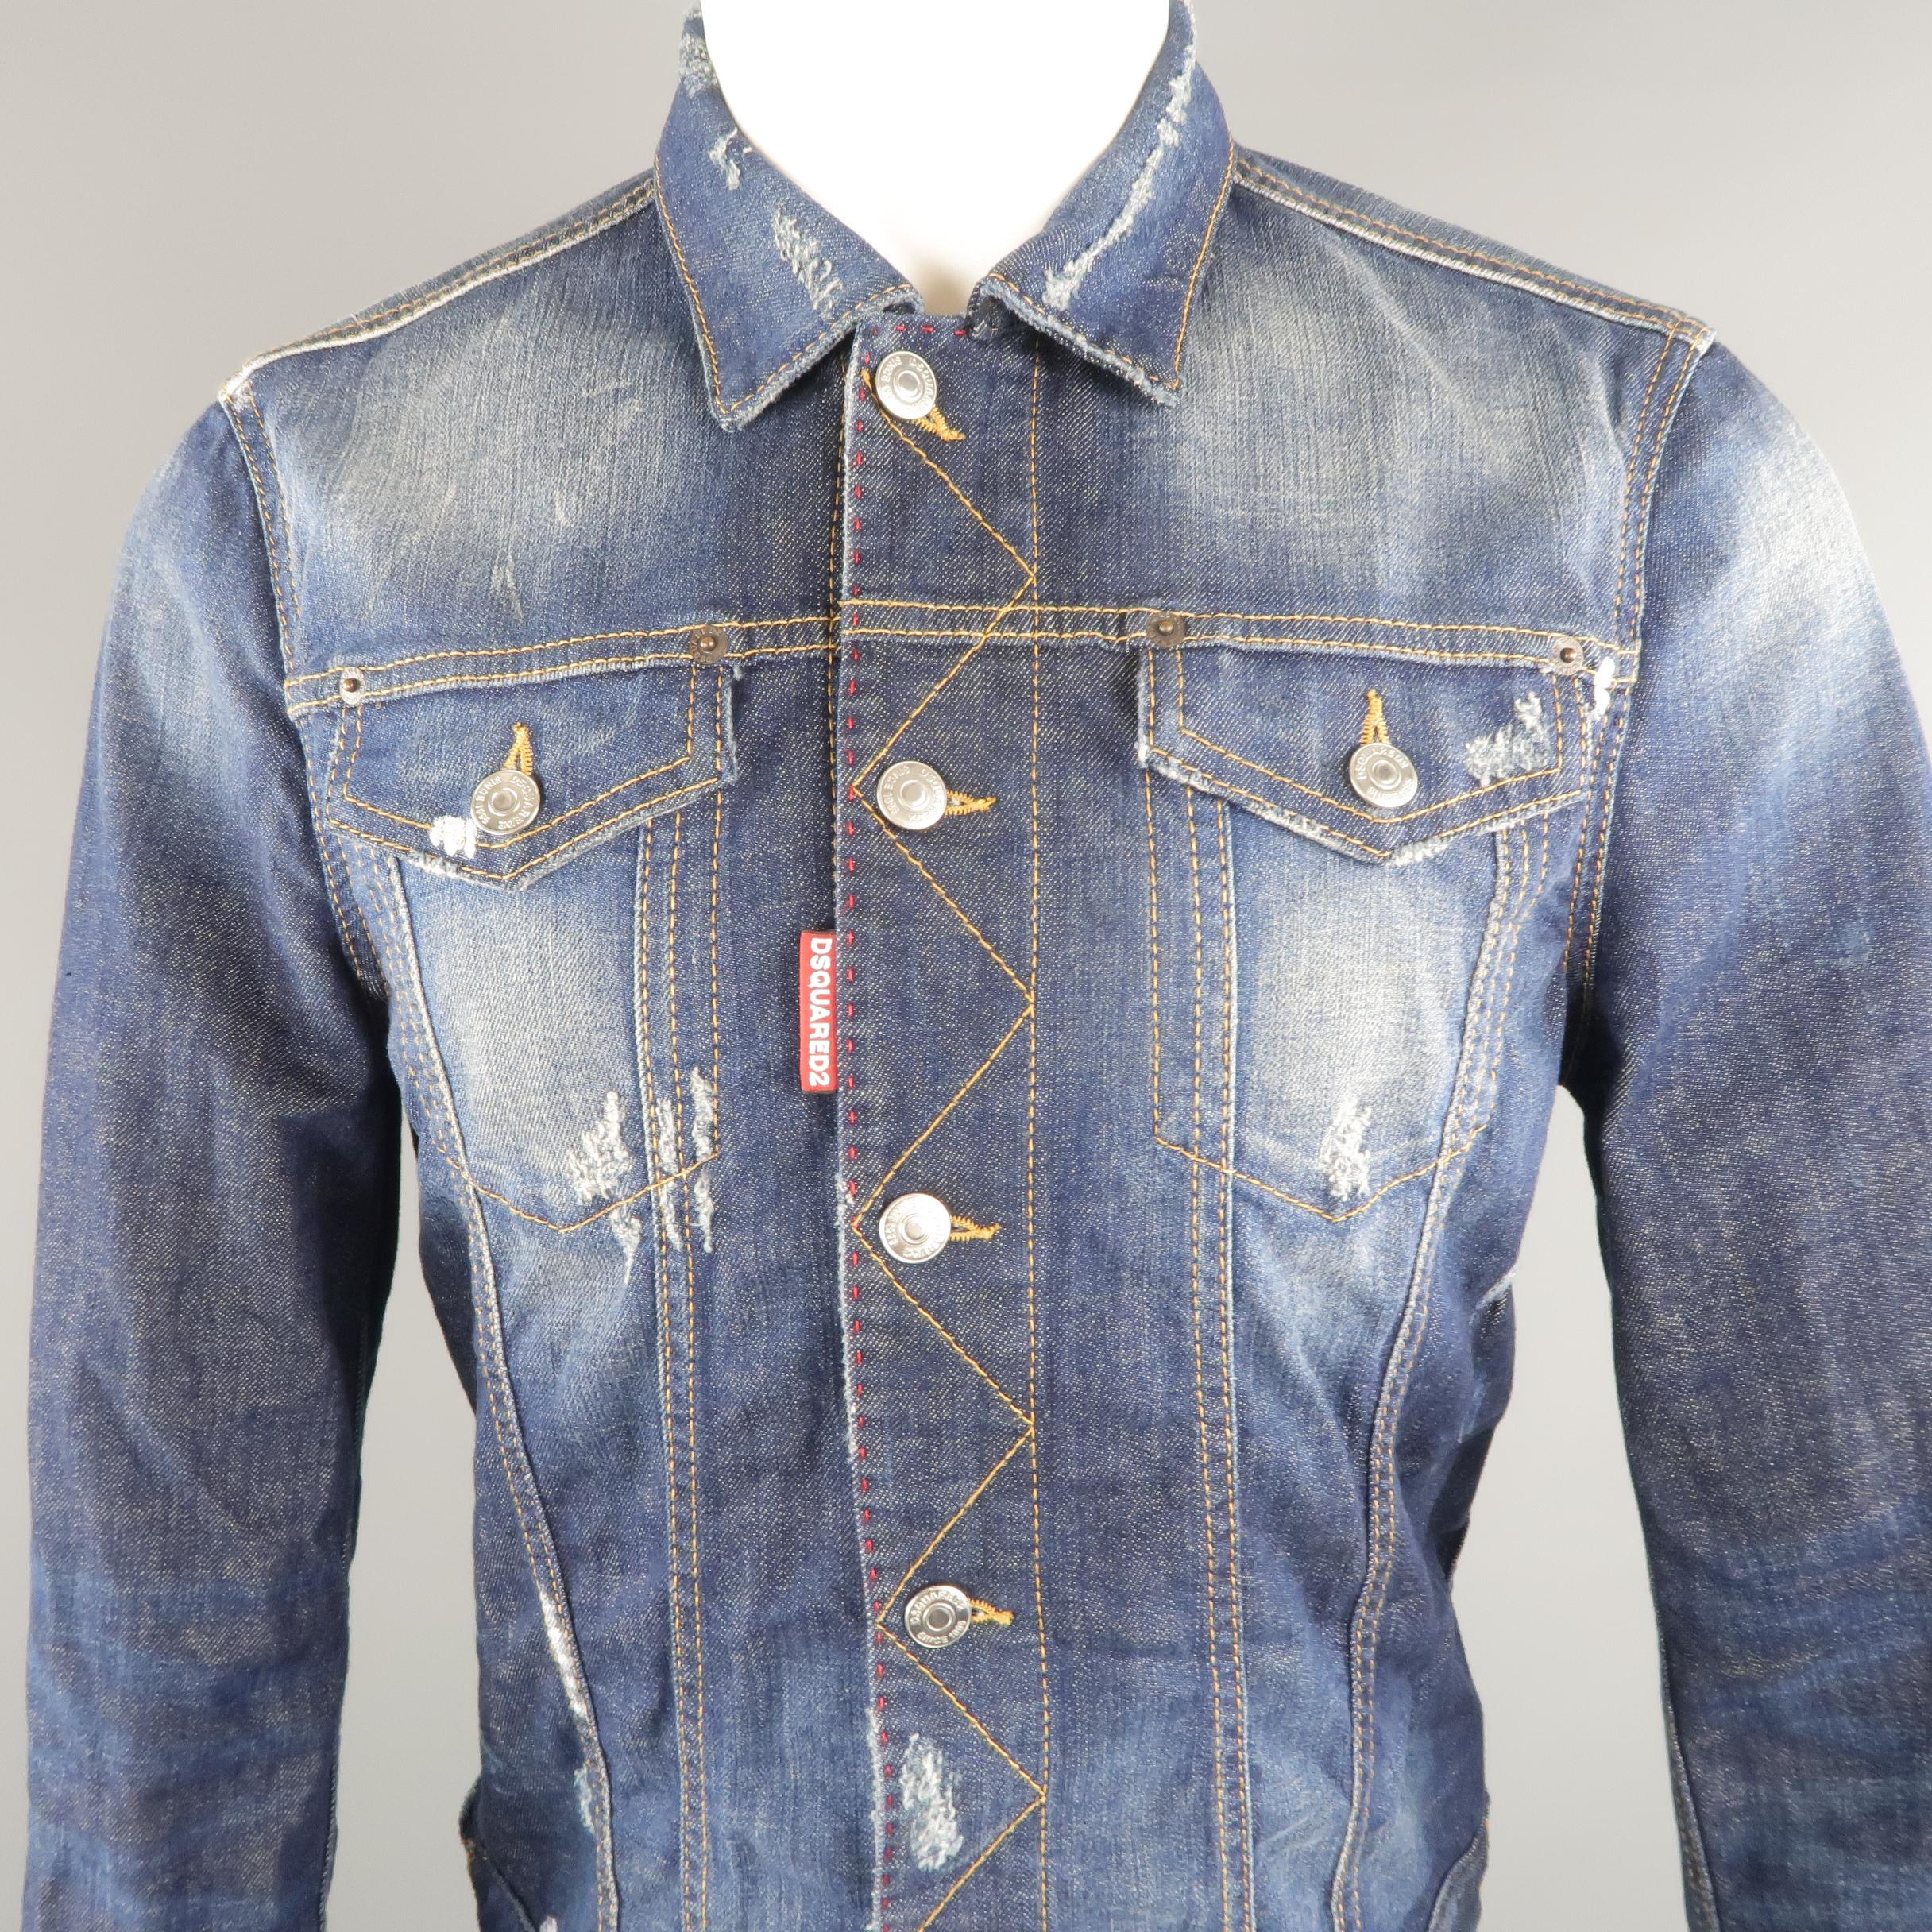 DSQUARED2 trucker jacket come in indigo denim, contrast stitches, patch flap  pockets, distressed and painted details throughout, and red zipper on the cuffs. Made in Italy.
 
Excellent Pre-Owned Condition.
Marked: 52 IT
Measurements:
 
Shoulder: 17